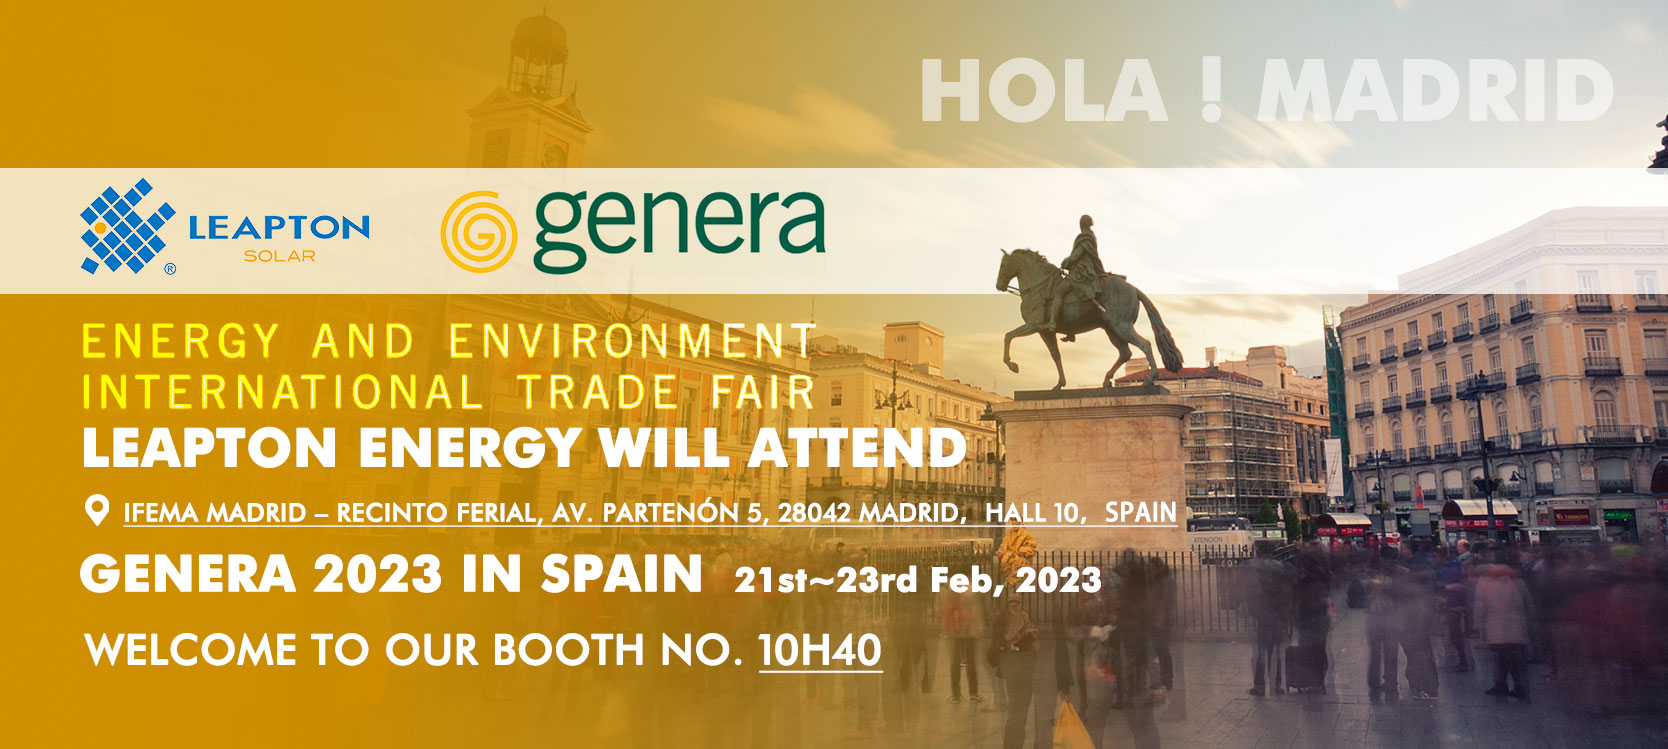 Leapton Energy will attend Genera 2023 on 21st~23rd Feb, 2023